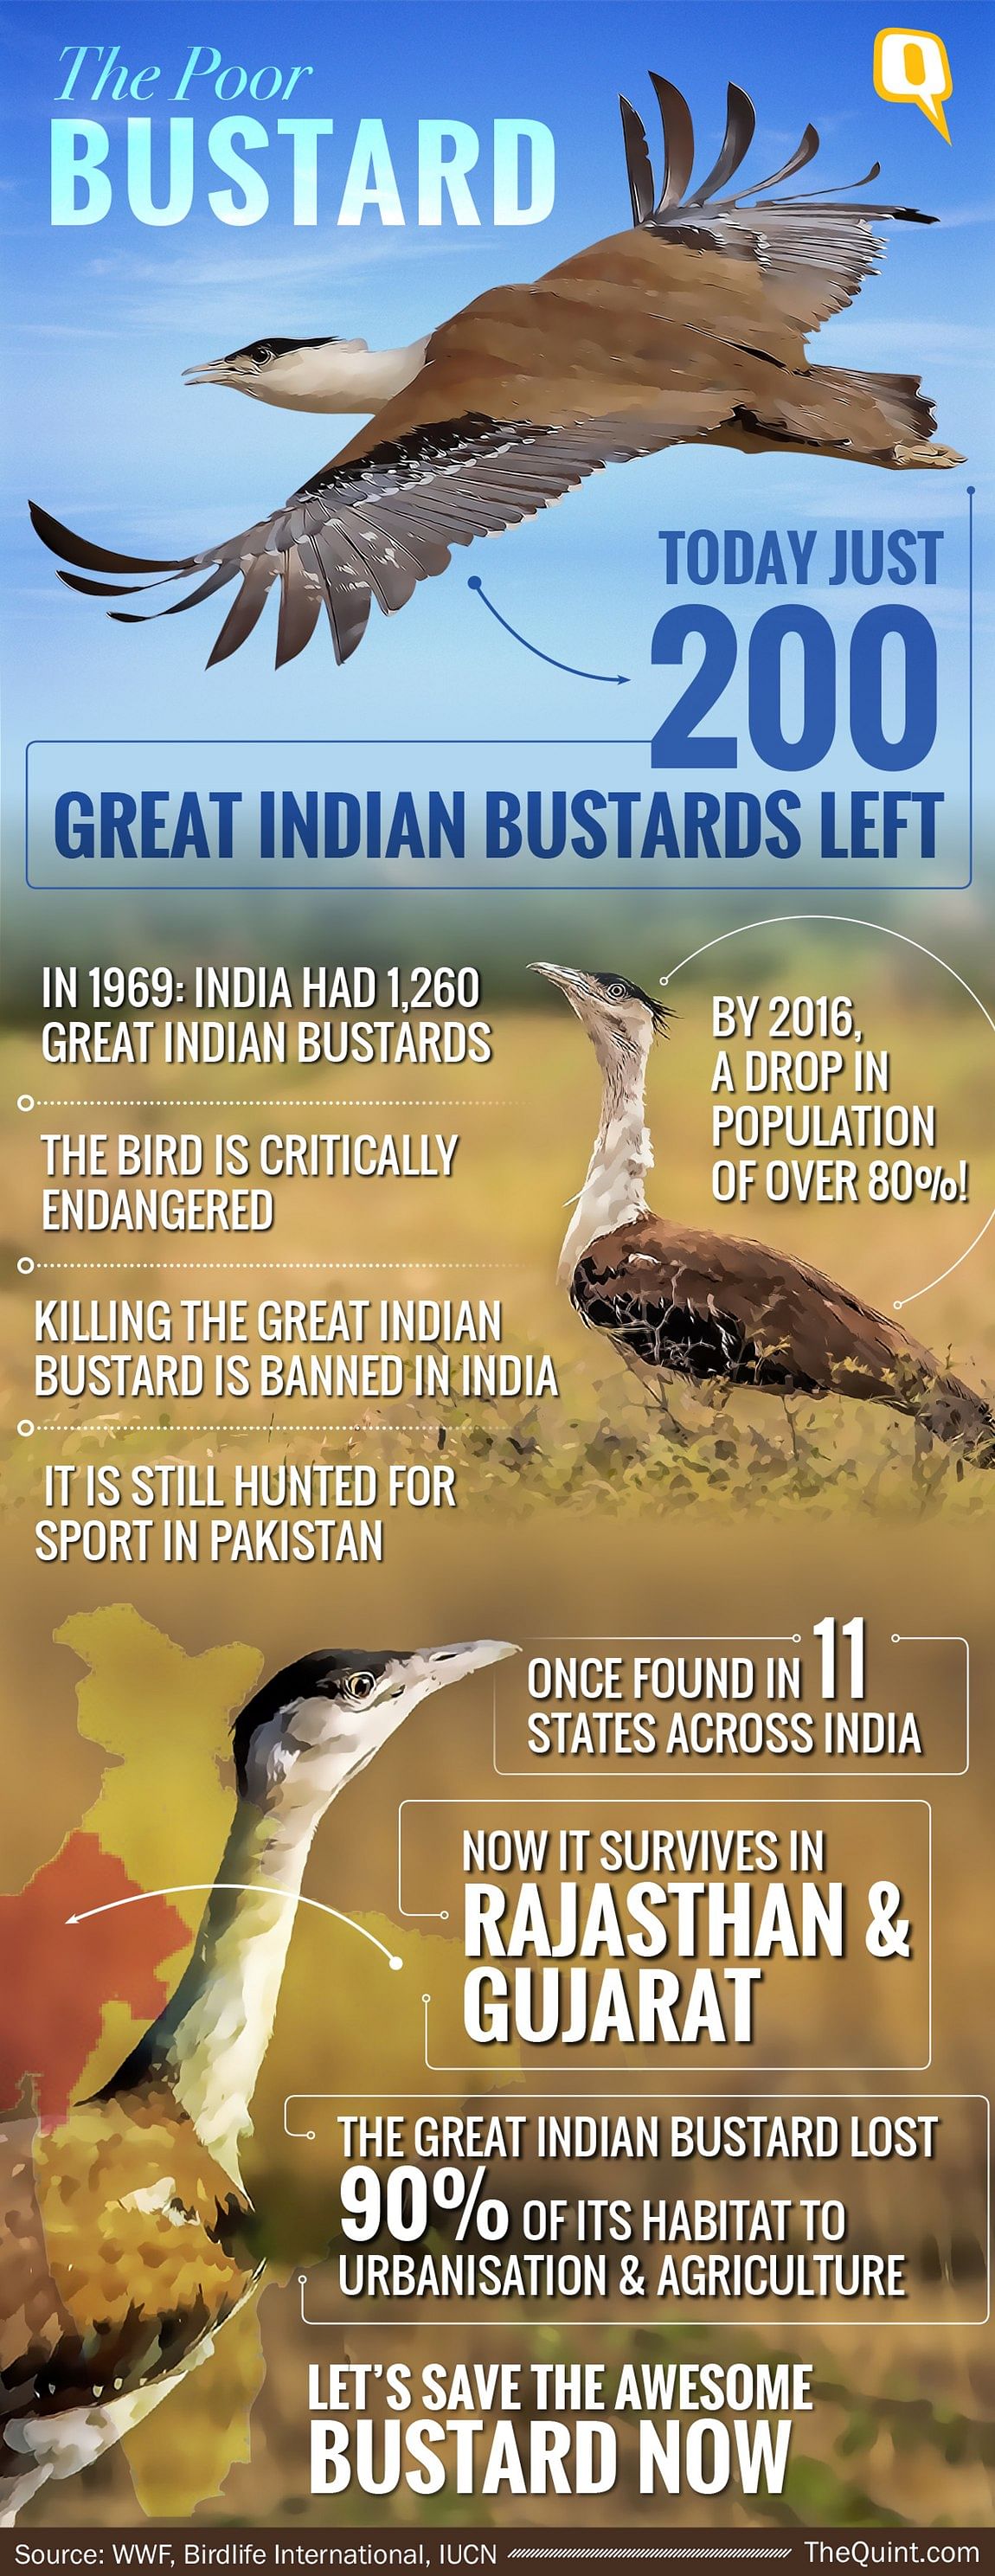 Critically endangered Great Indian Bustards – of which around 200 are left – are being threatened by windmills.